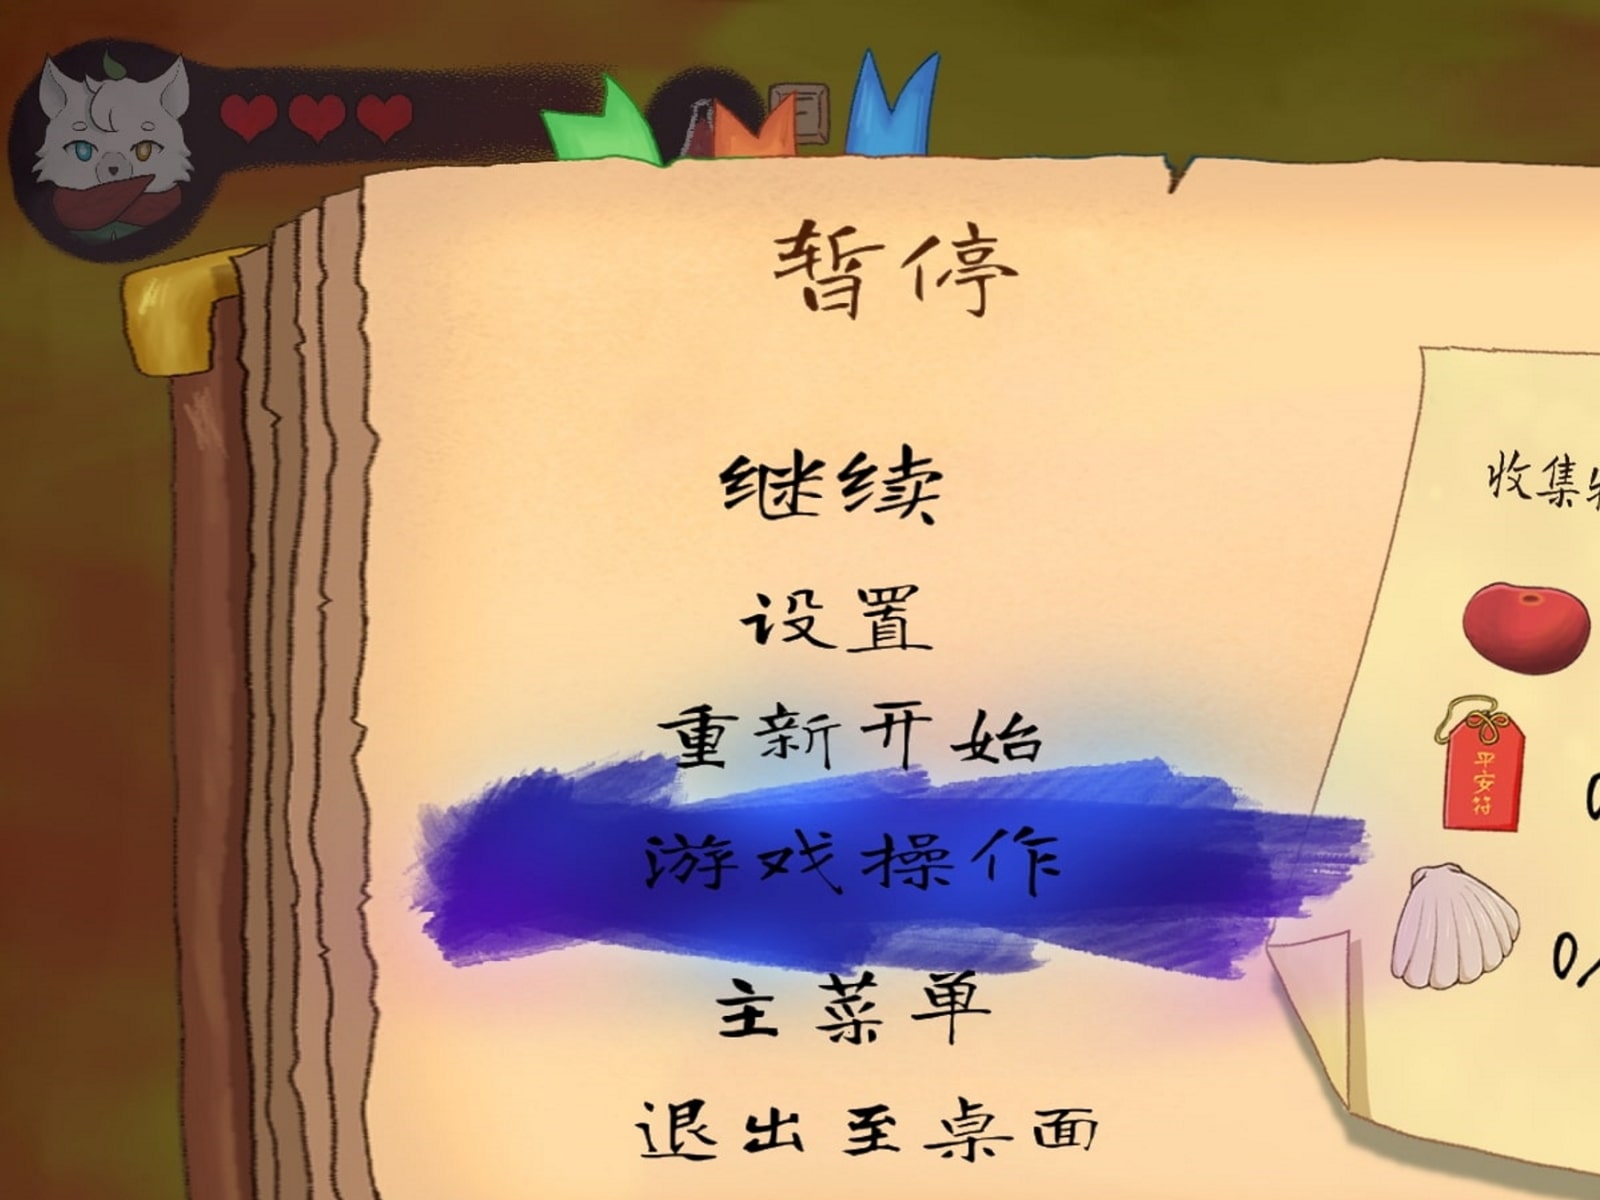 As shown in this translated menu, Avani is now playable in Simplified Chinese